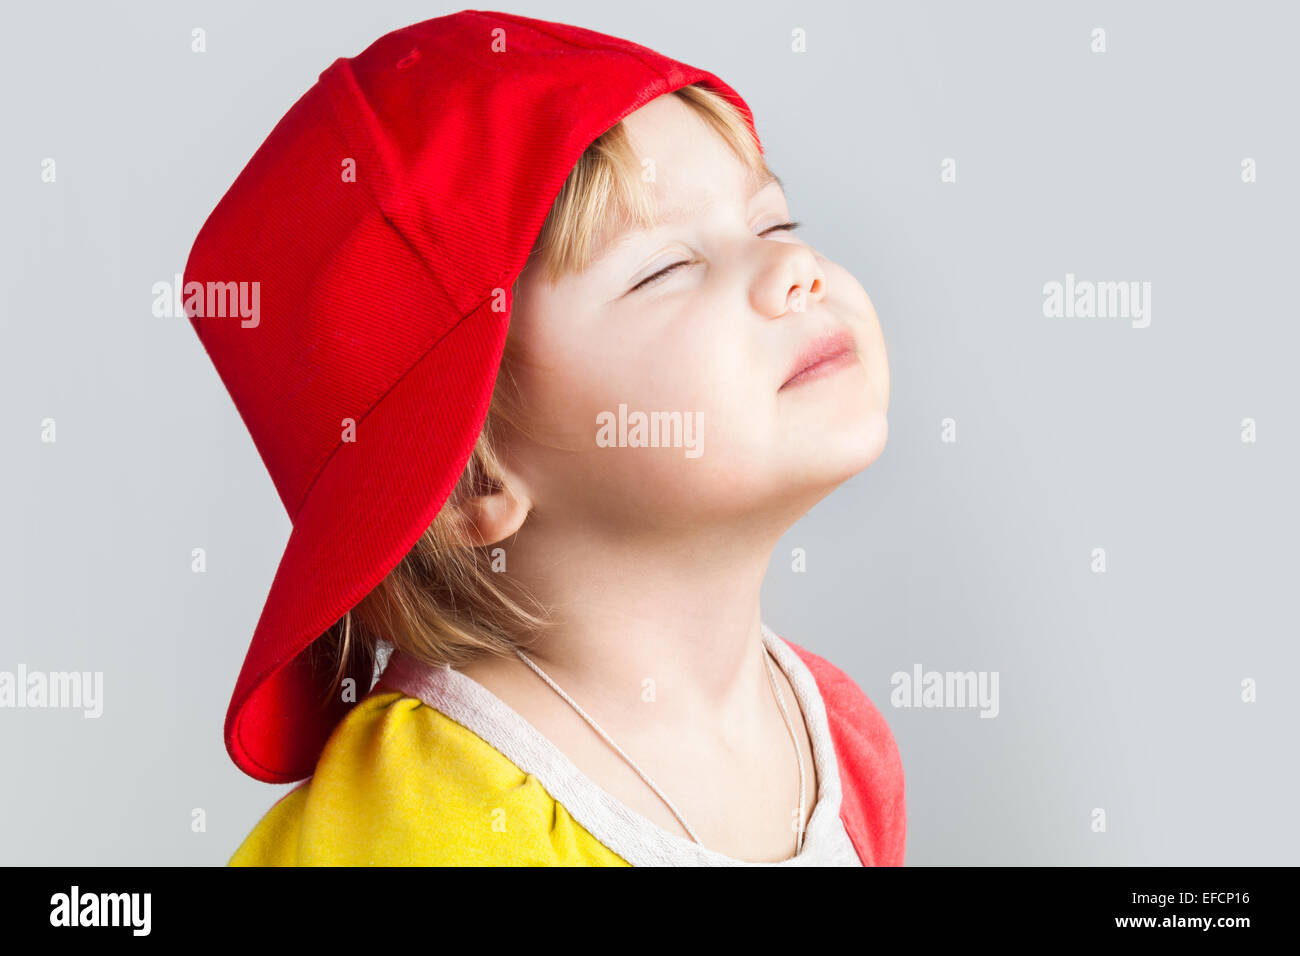 Studio portrait of happy baby girl with closed eyes in red baseball cap over gray wall background Stock Photo